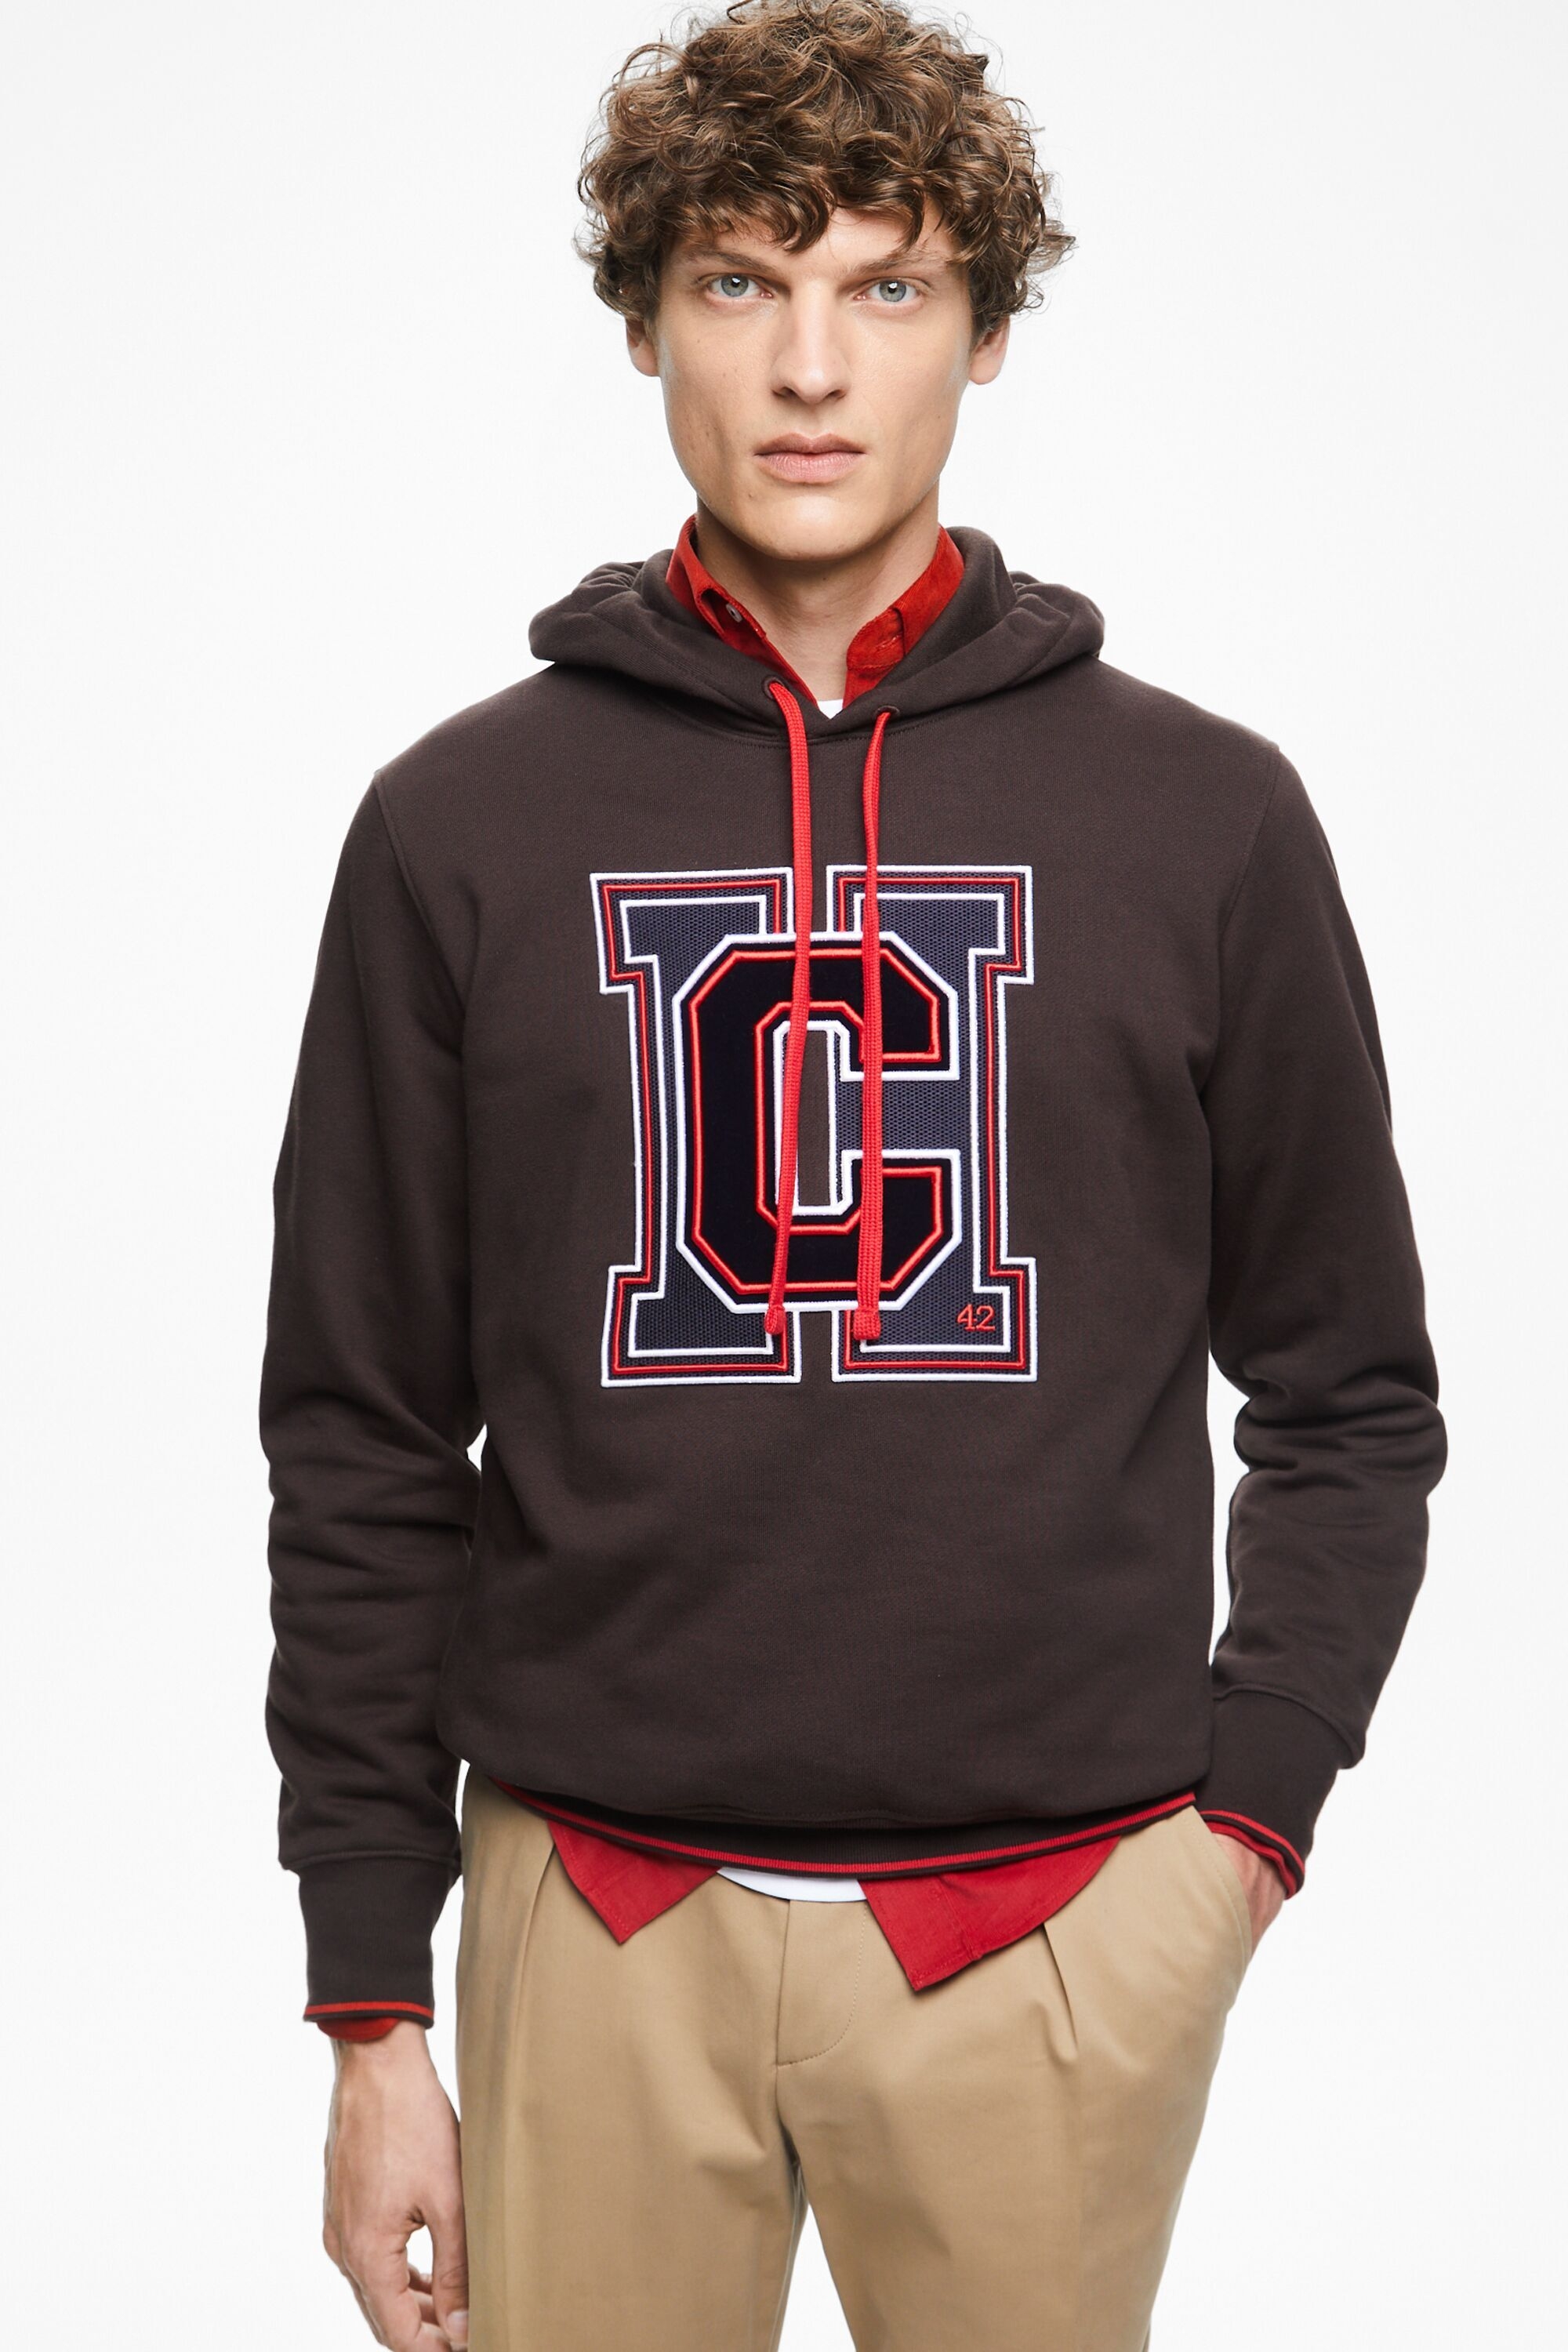 CH Varsity embroidered hoodie